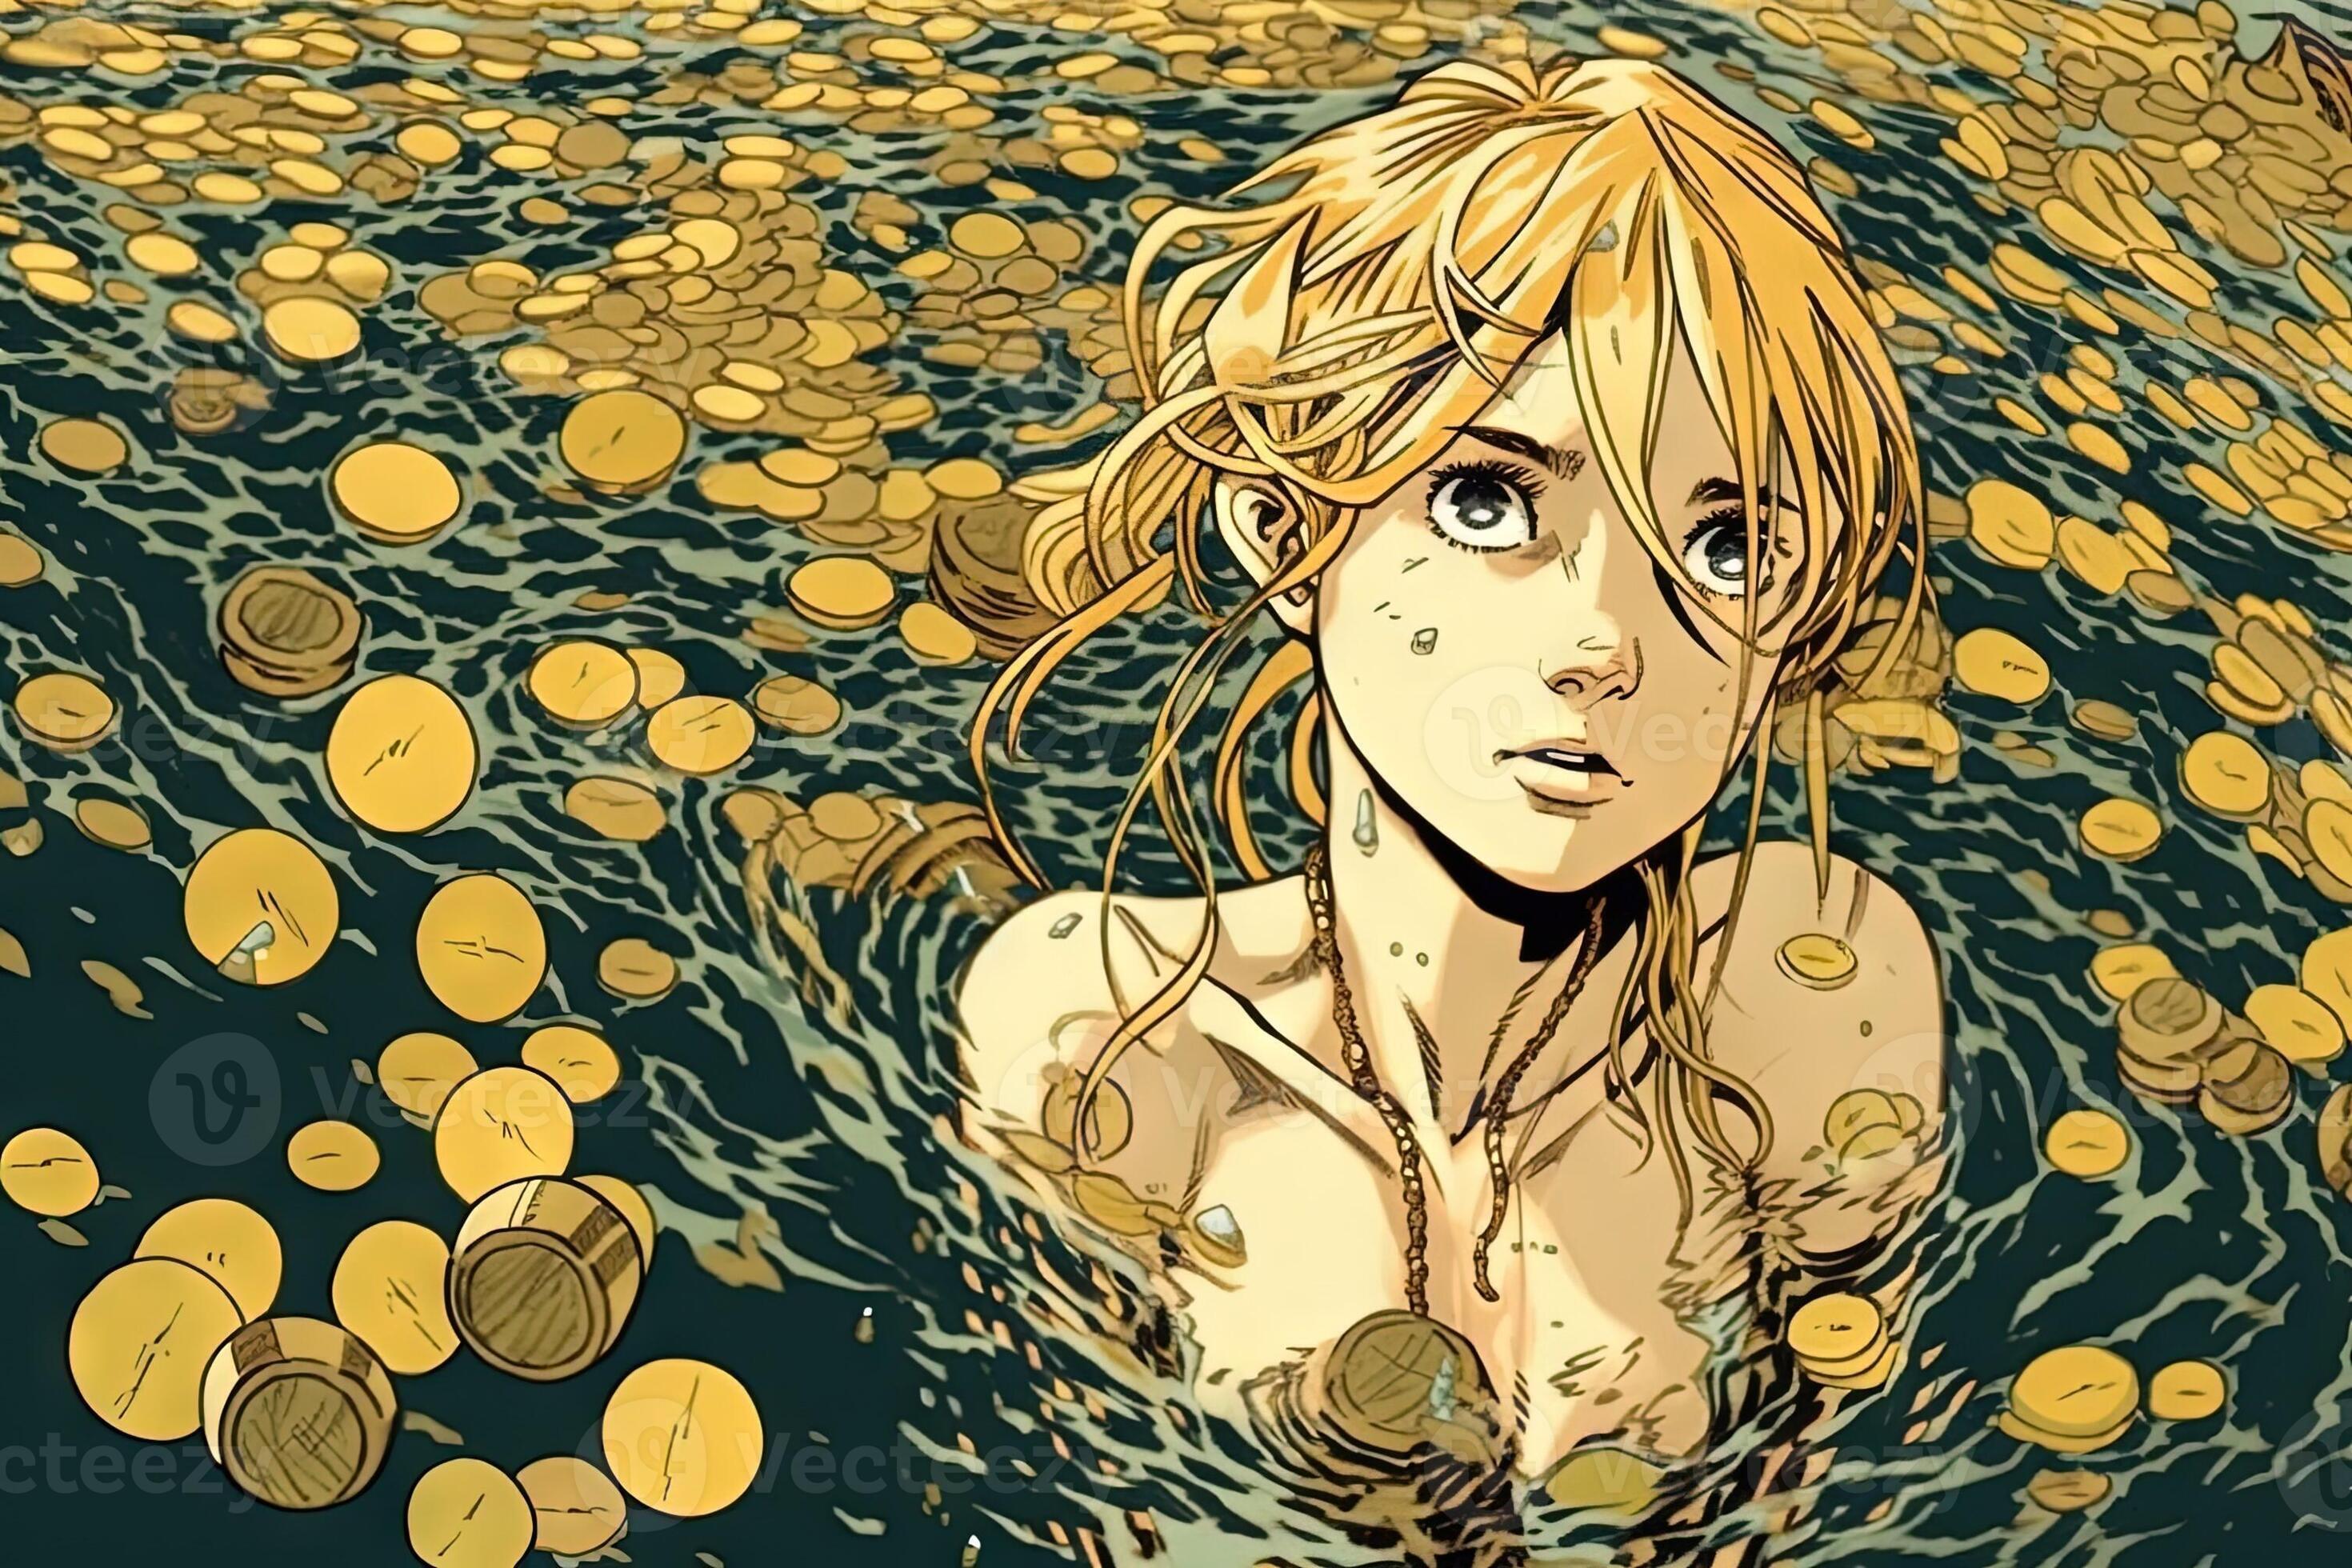 where do you use your gold coins in anime dimension｜TikTok Search